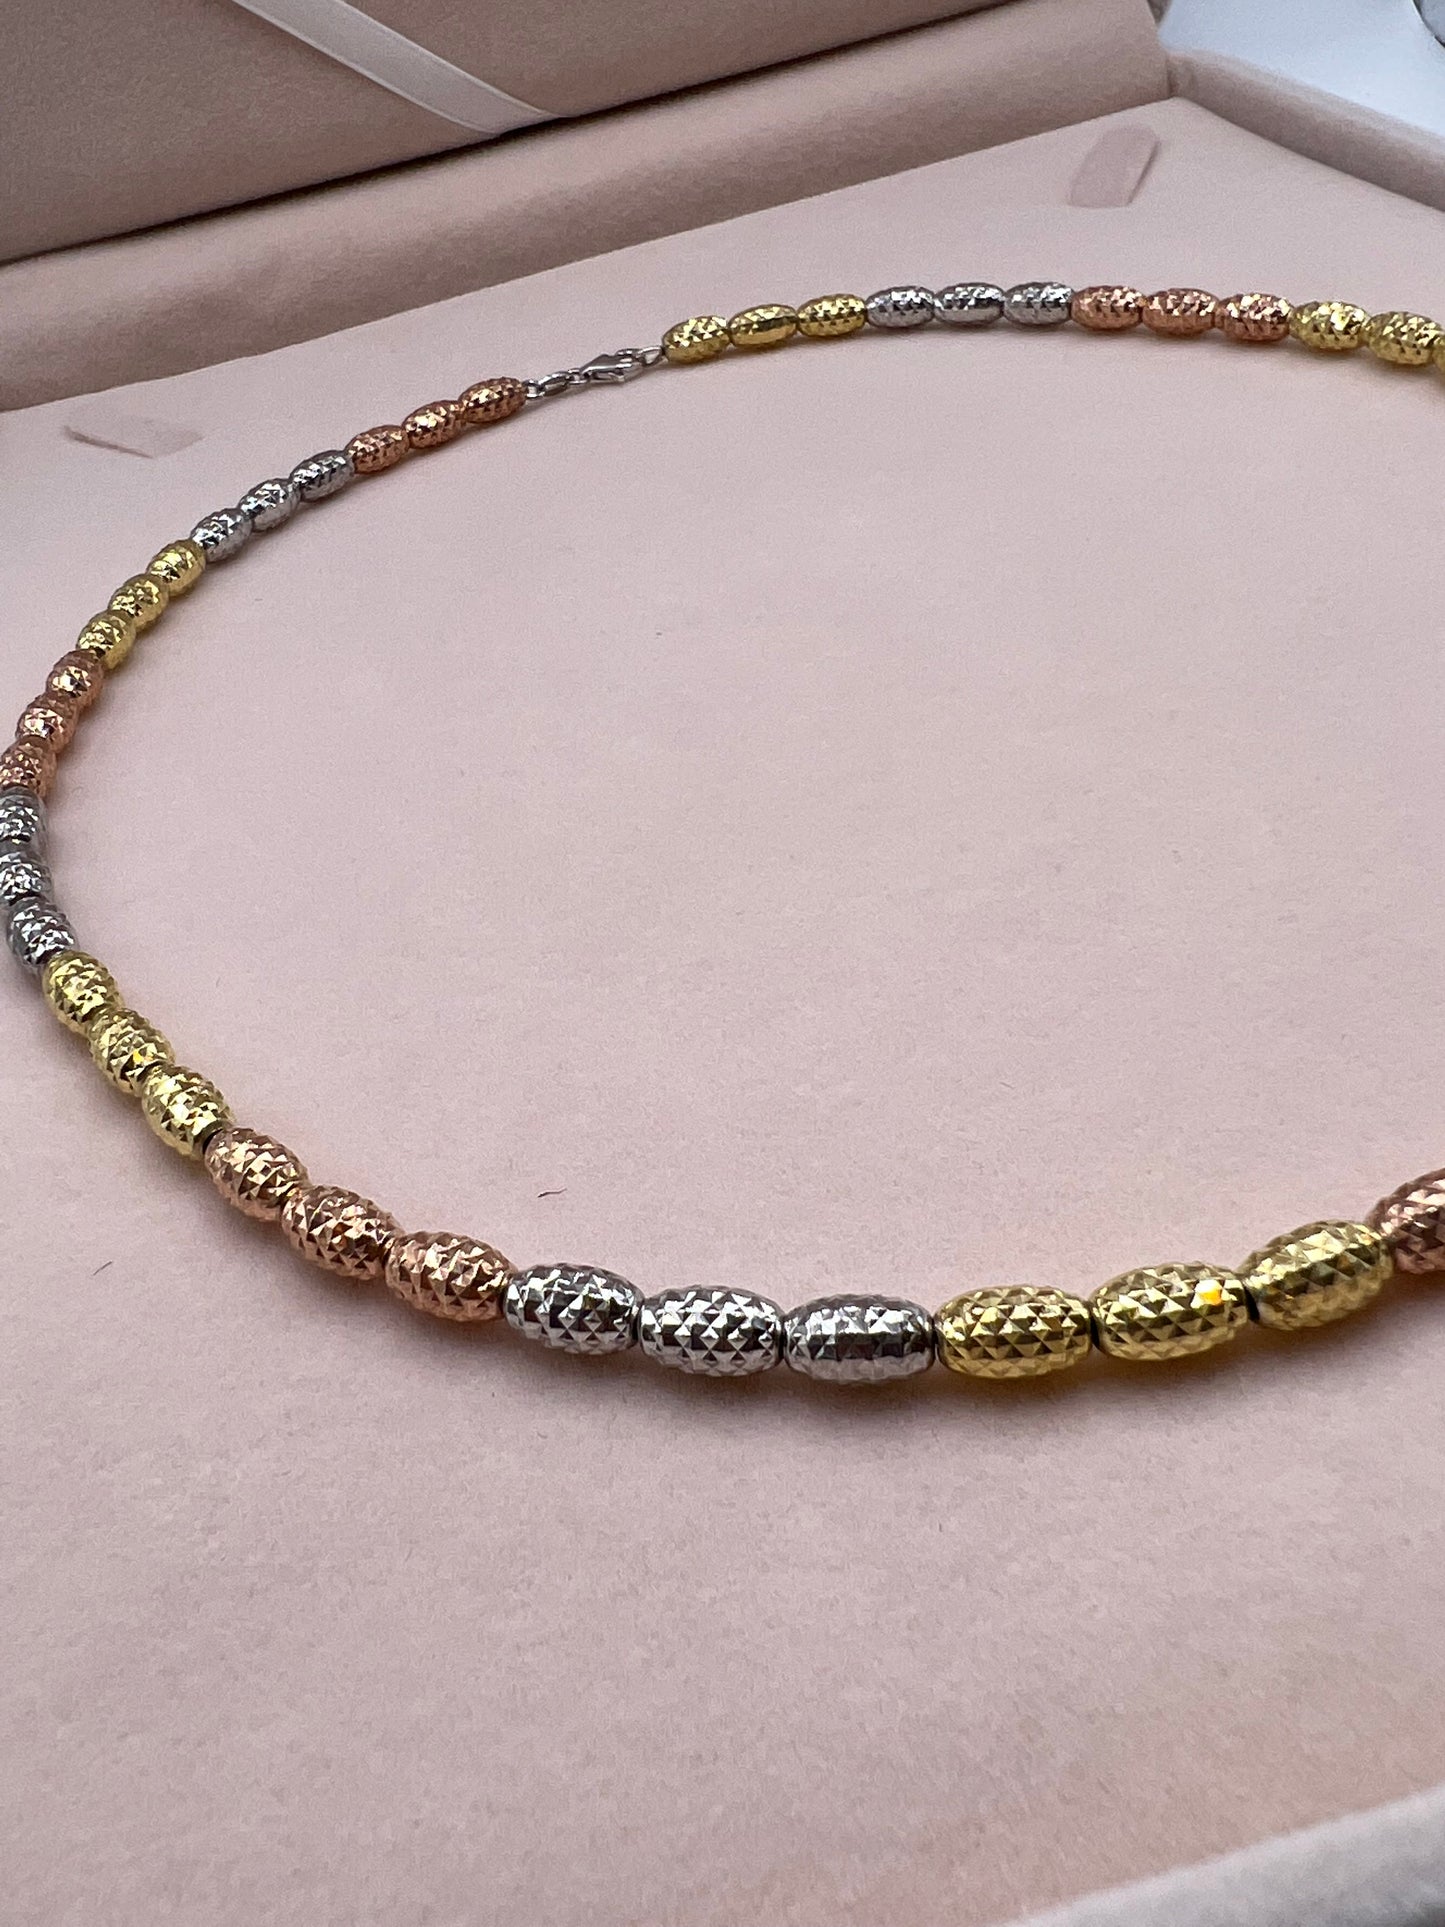 Three Tone, Rose Gold, Yellow Gold and Silver  17 1/2 Neckless 14K Gold Filled - Sterling Silver